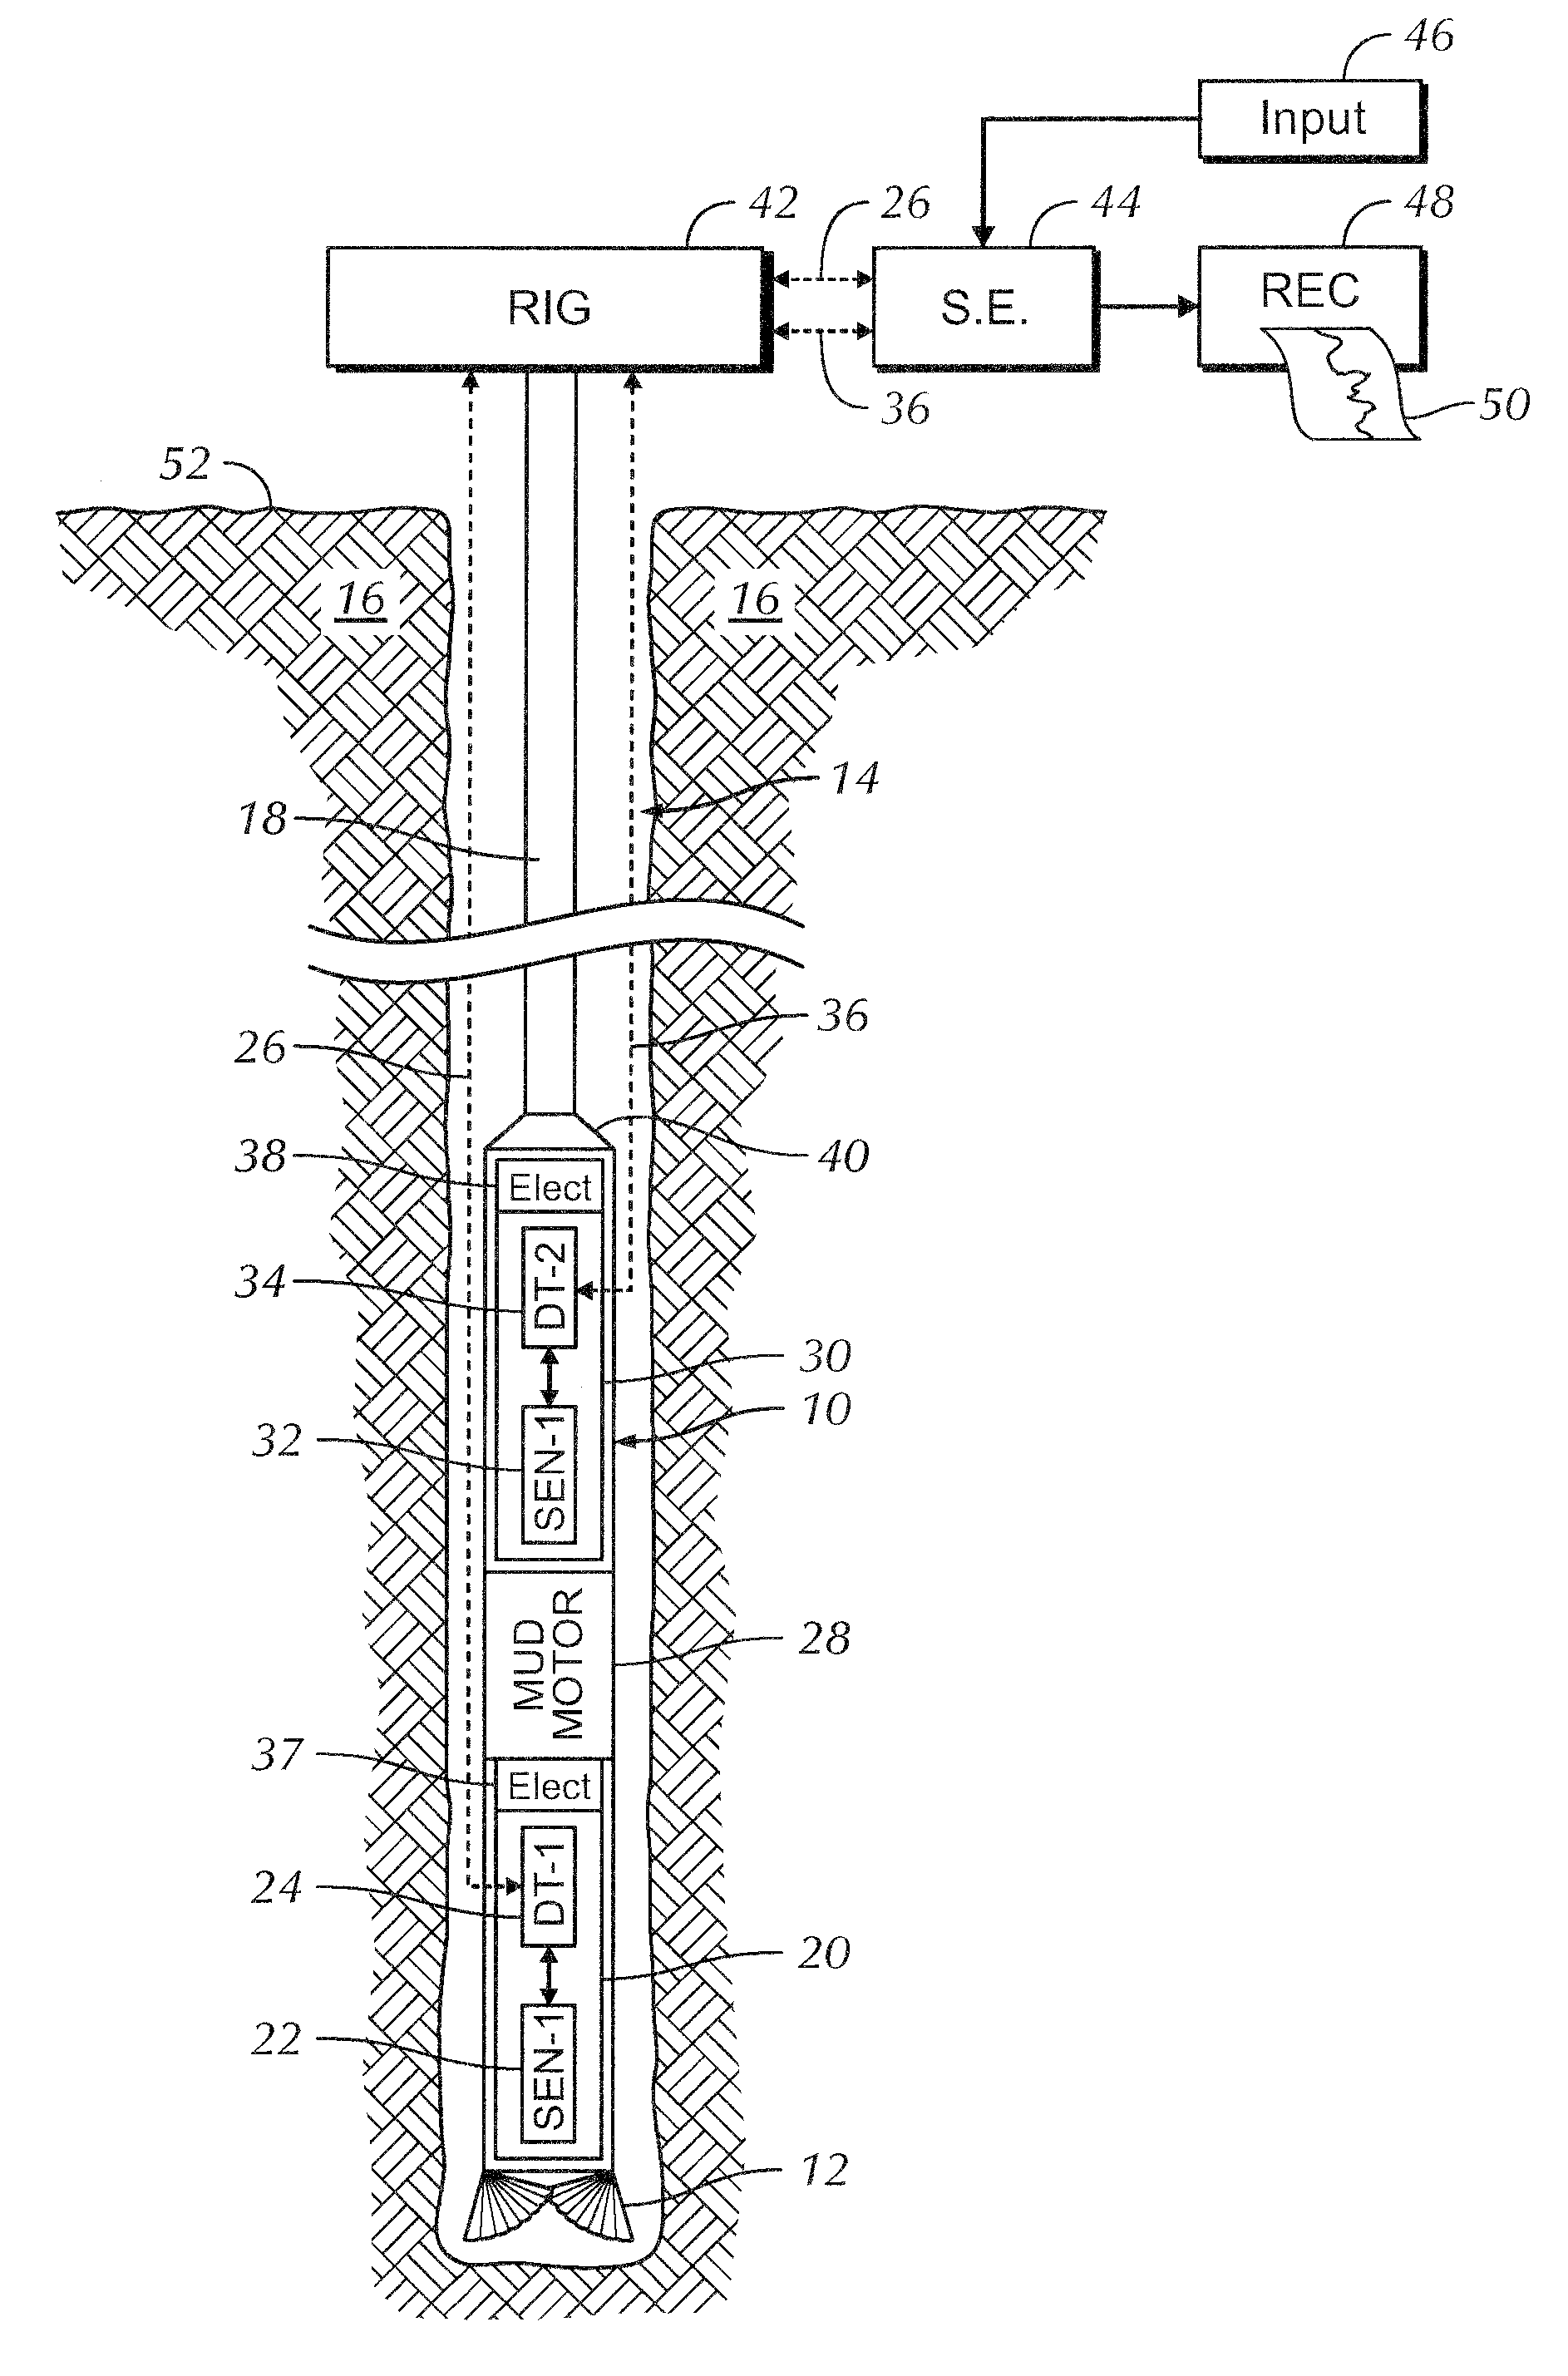 Drilling system comprising a plurality of borehole telemetry systems